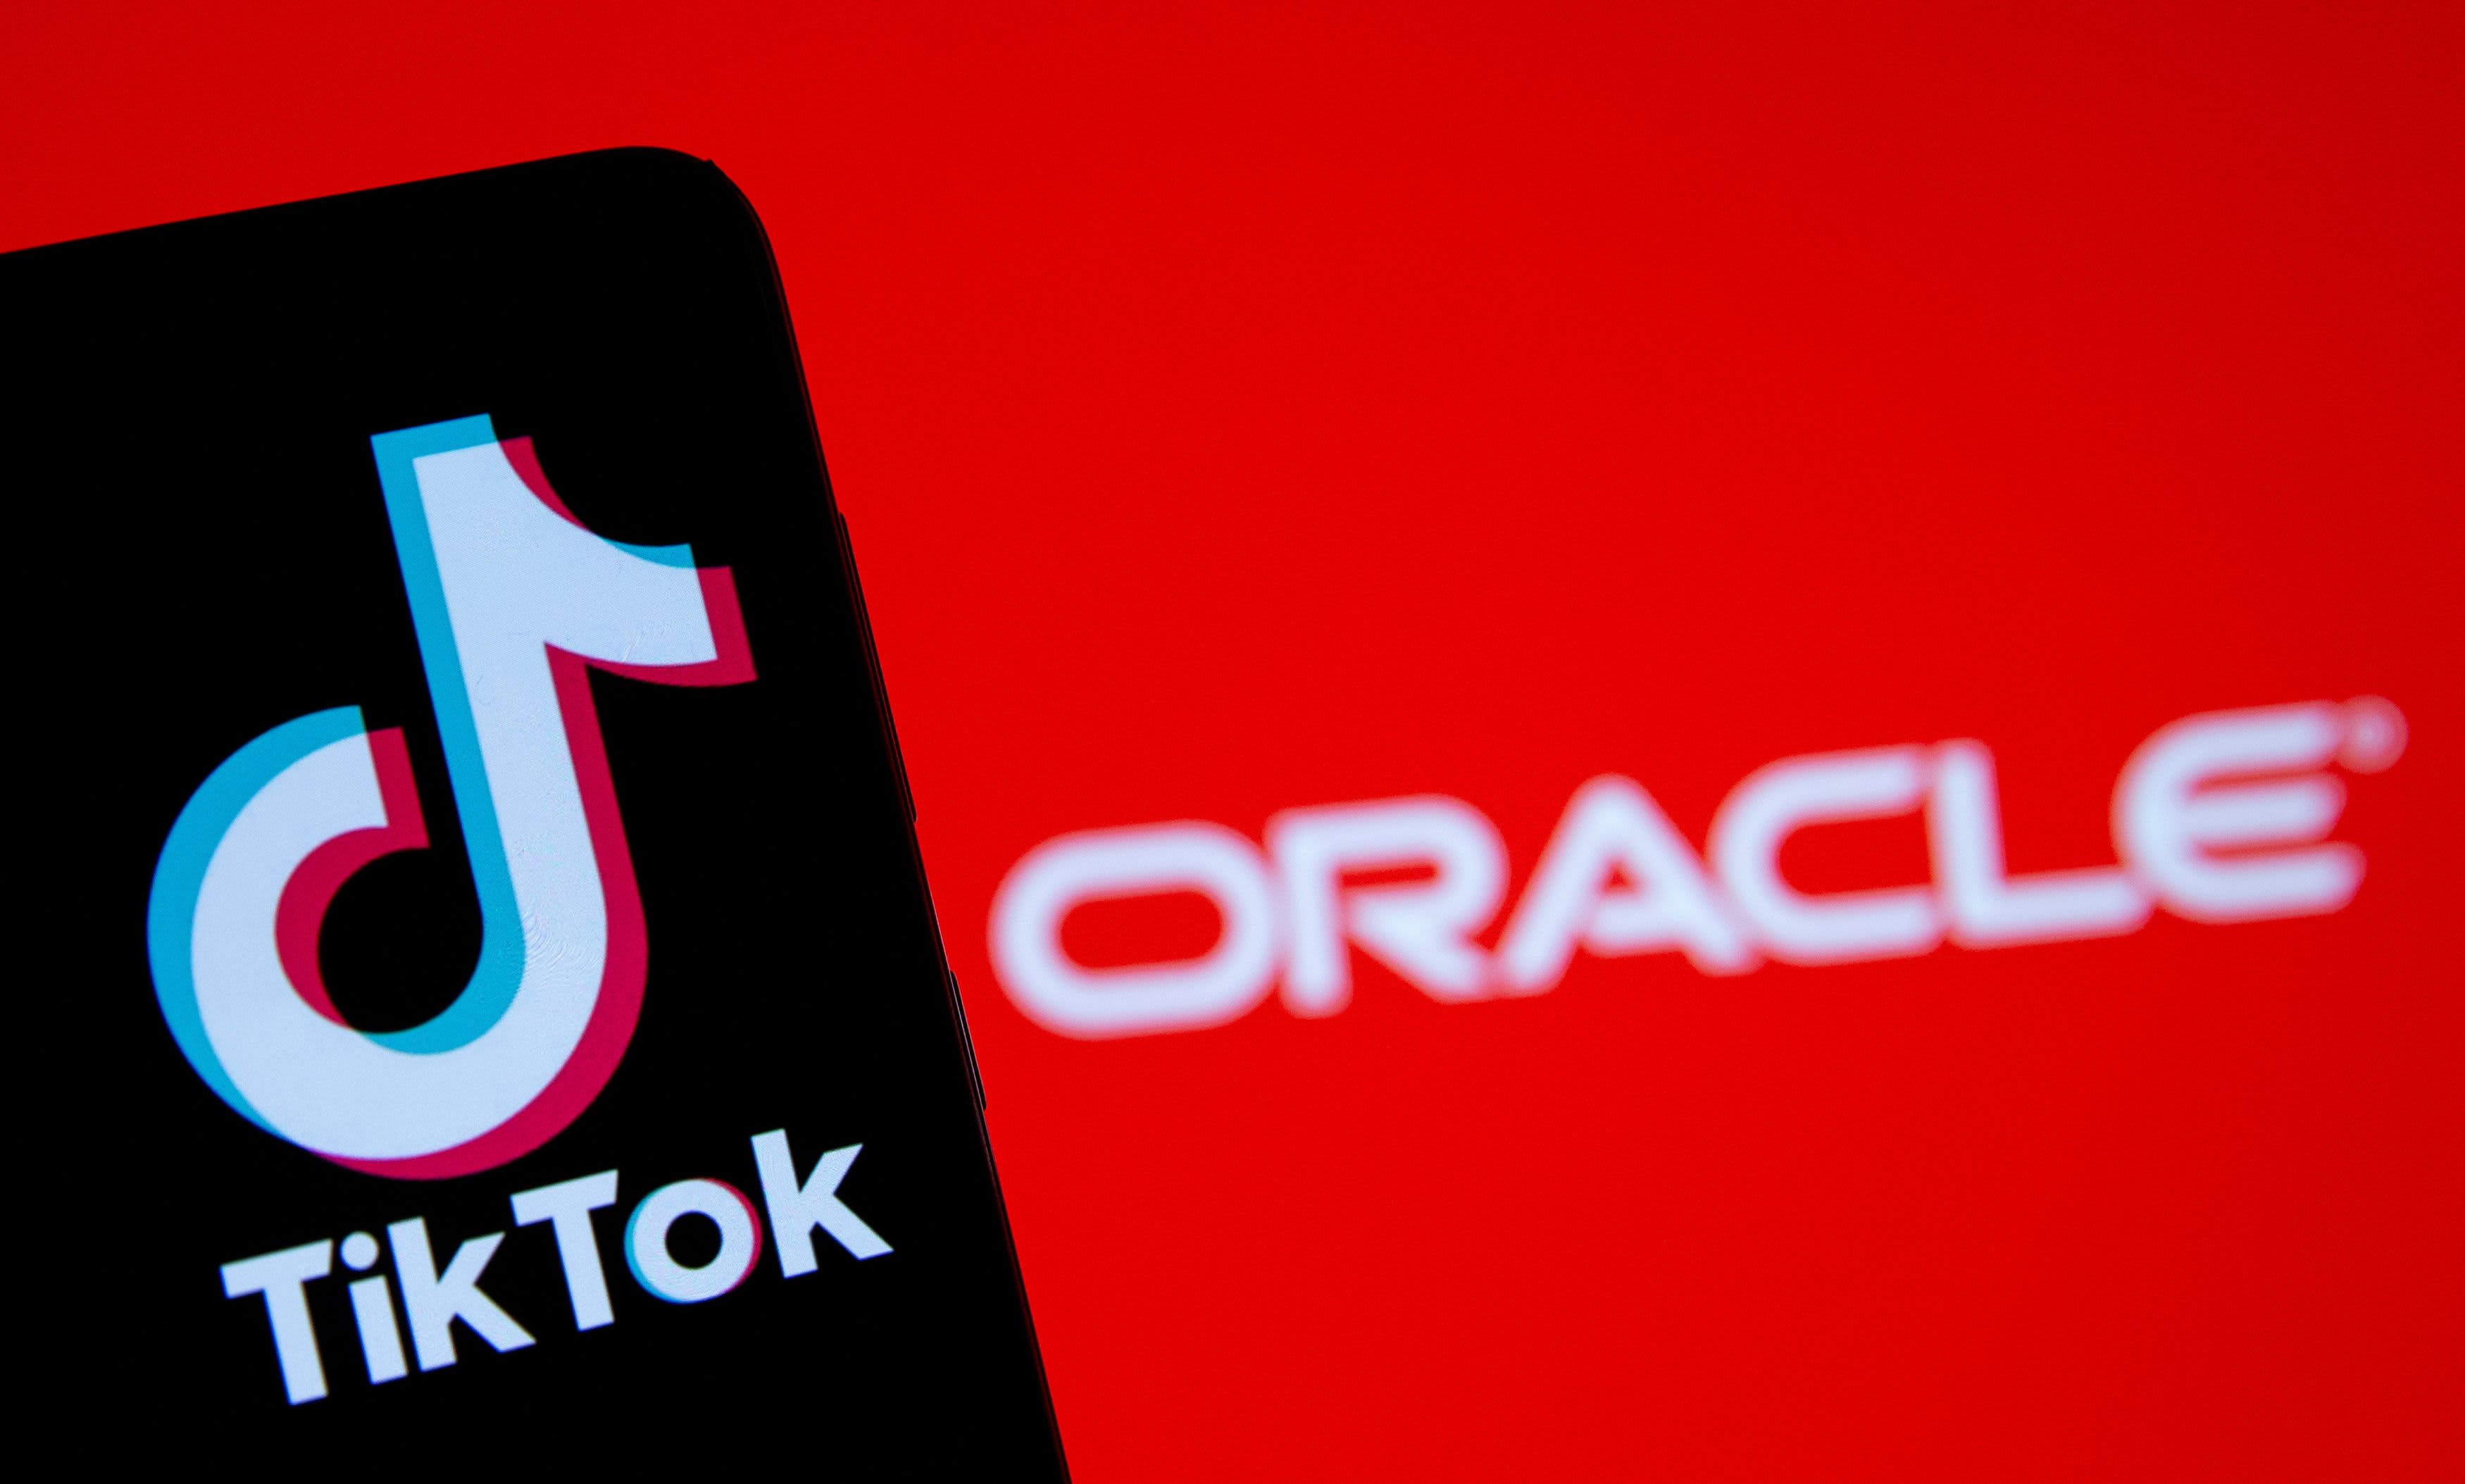 Oracle met with Senate aides about TikTok data storage after House ban passed 